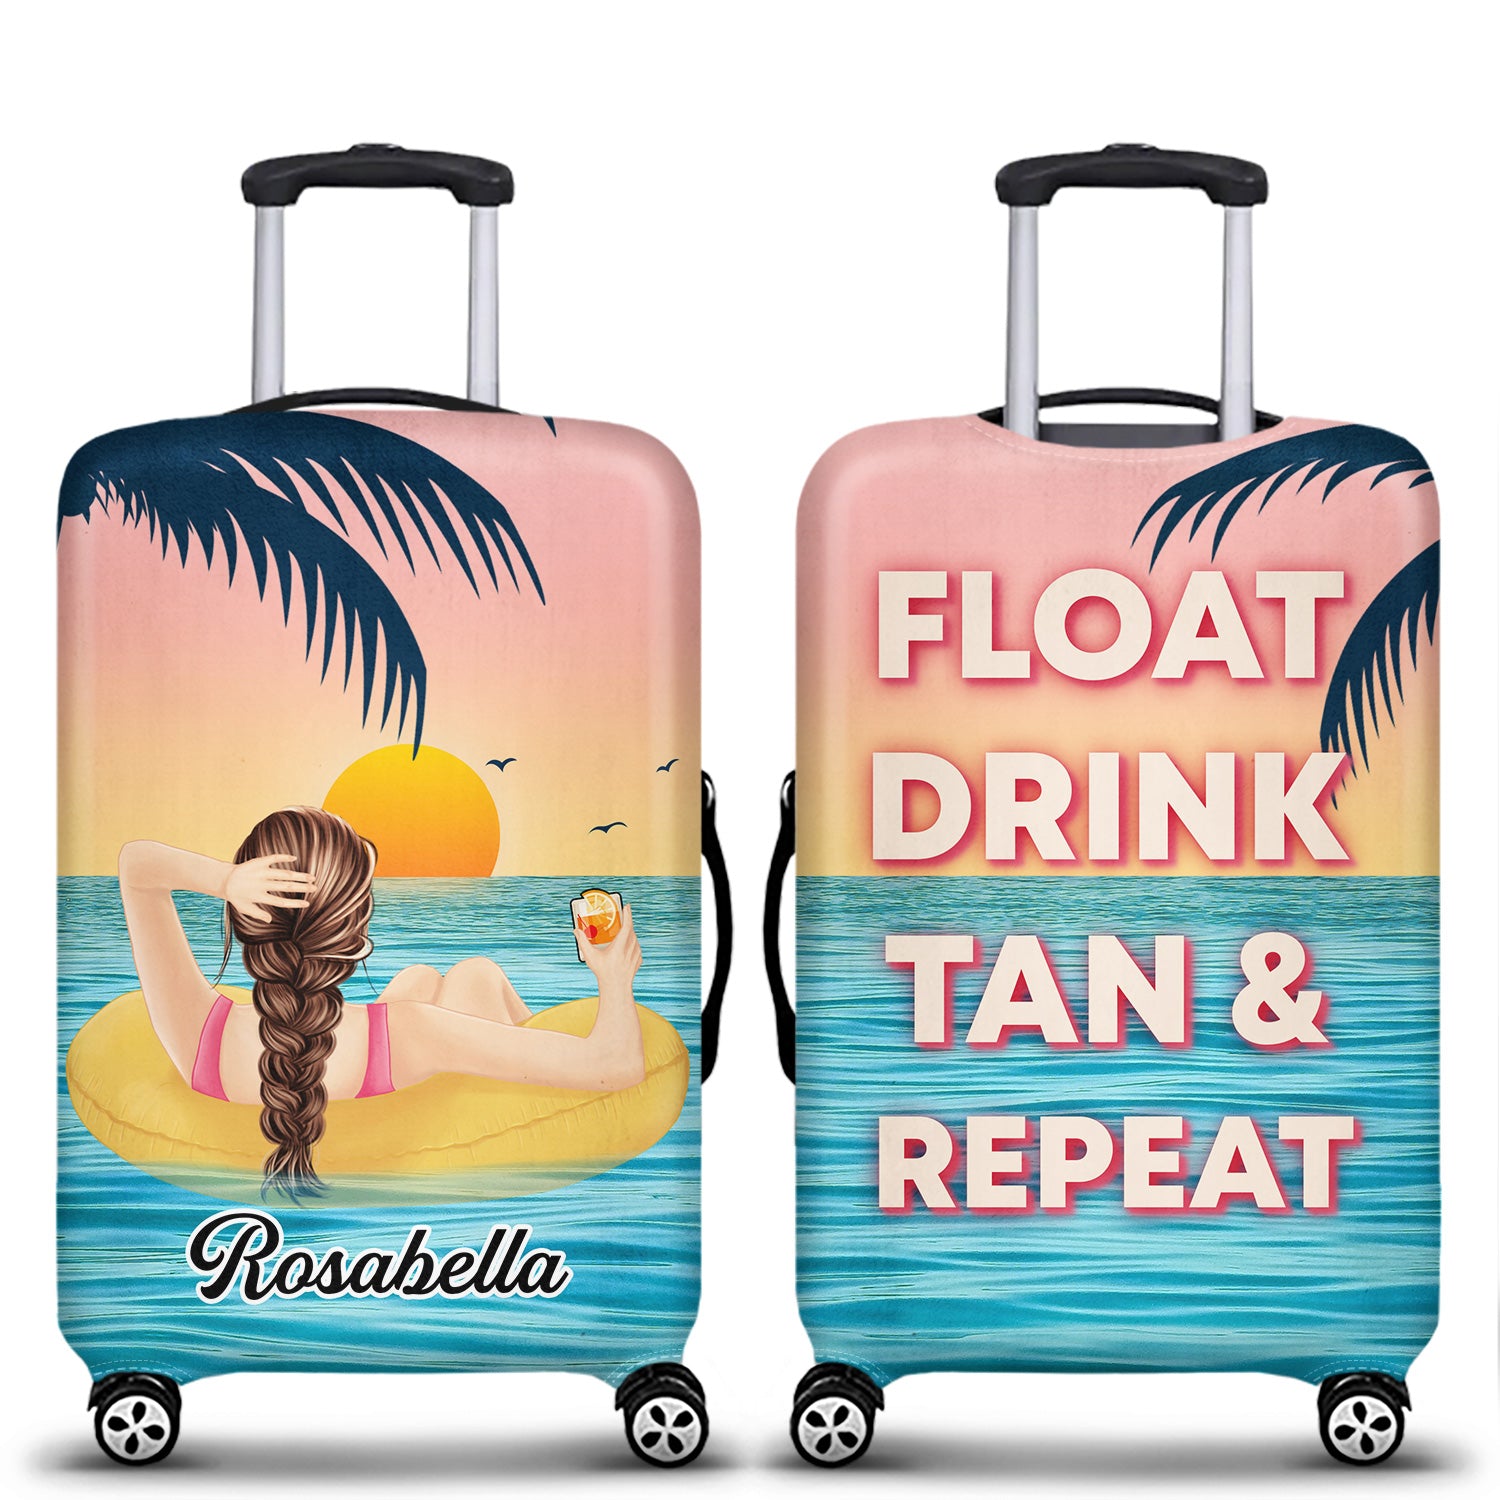 Float Drink Tan & Repeat Summer Beach Vibes - Gift For Her, Yourself, Girlfriend, Traveling Lovers - Personalized Custom Luggage Cover